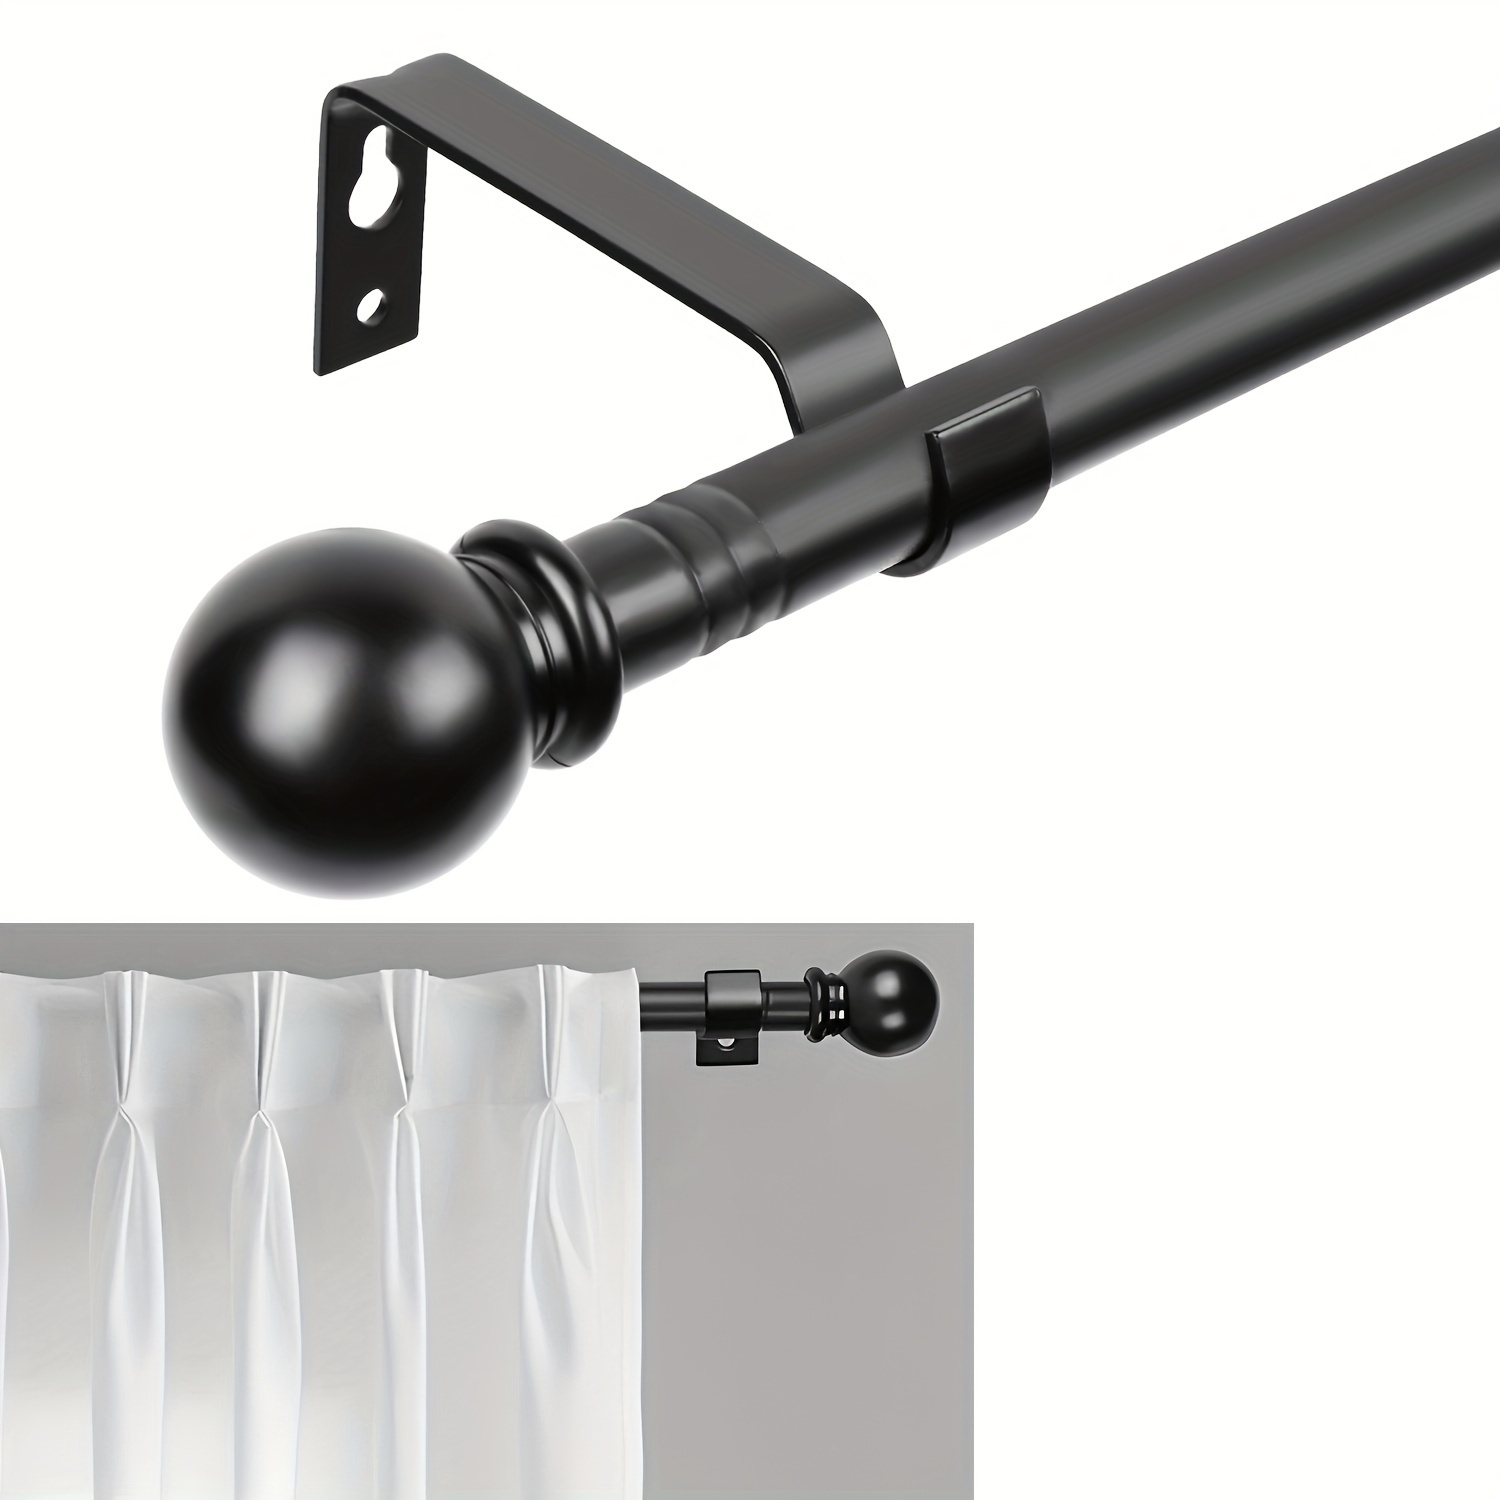 

Matte Black Heavy-duty Metal Curtain Rod With Aluminum Finials - 5/8" Diameter, Includes Brackets For Easy Installation